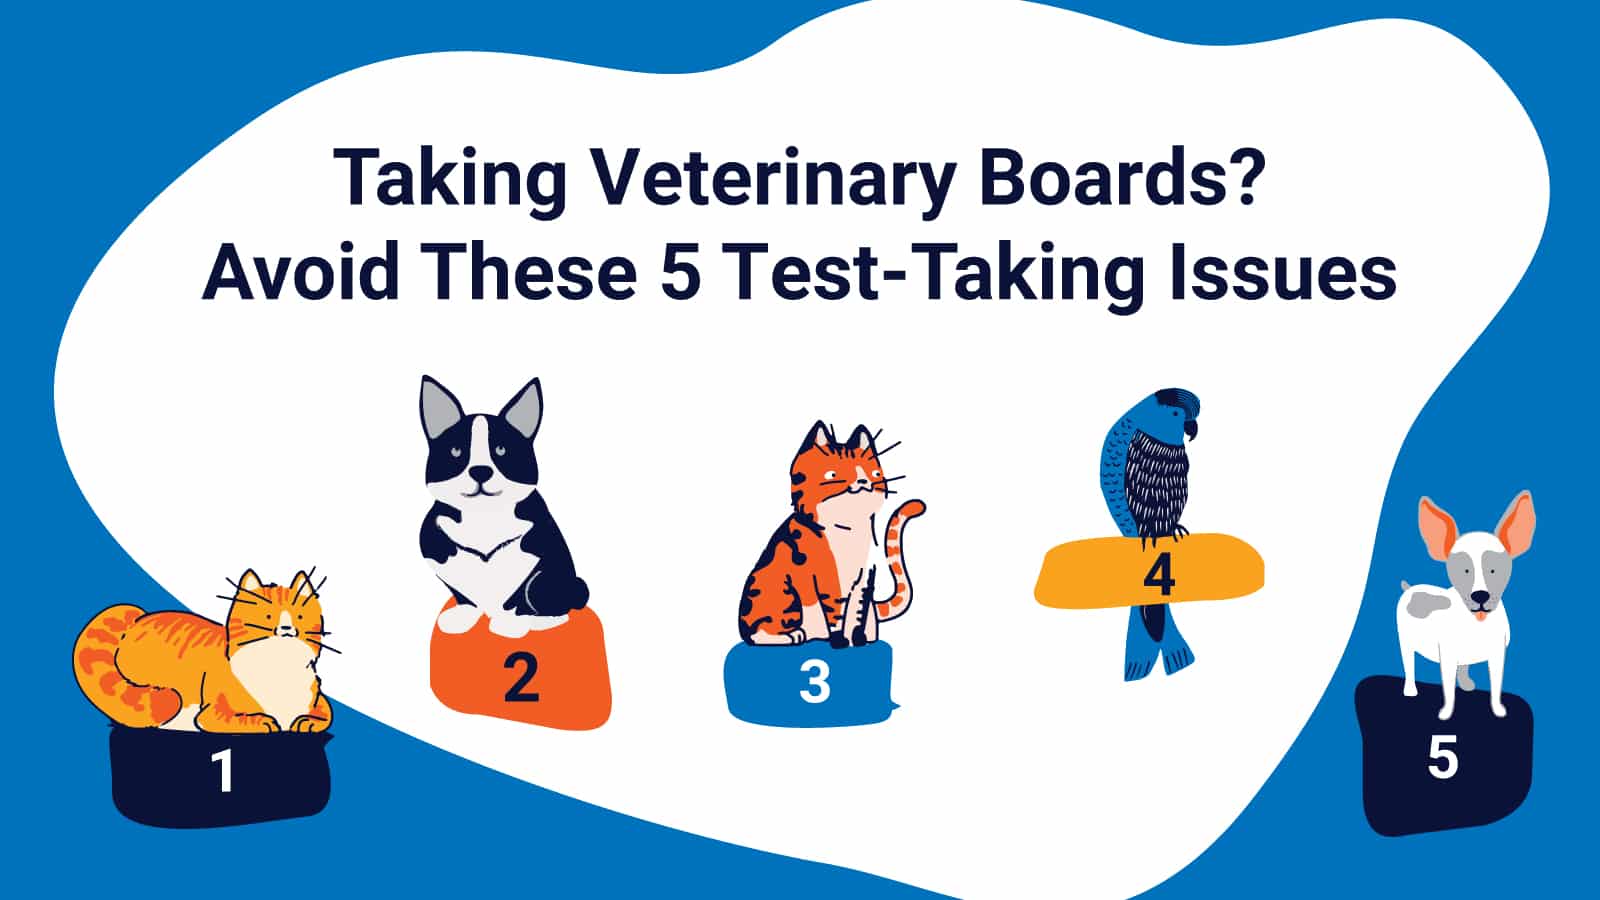 Taking Veterinary Boards? Avoid These 5 test-Taking Issues